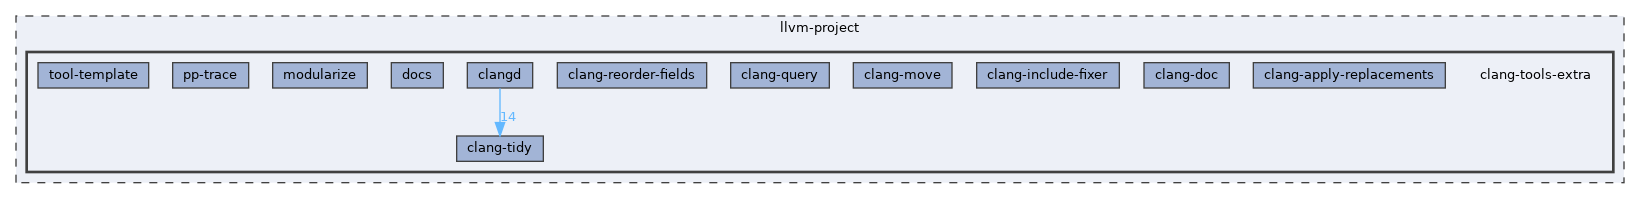 clang-tools-extra